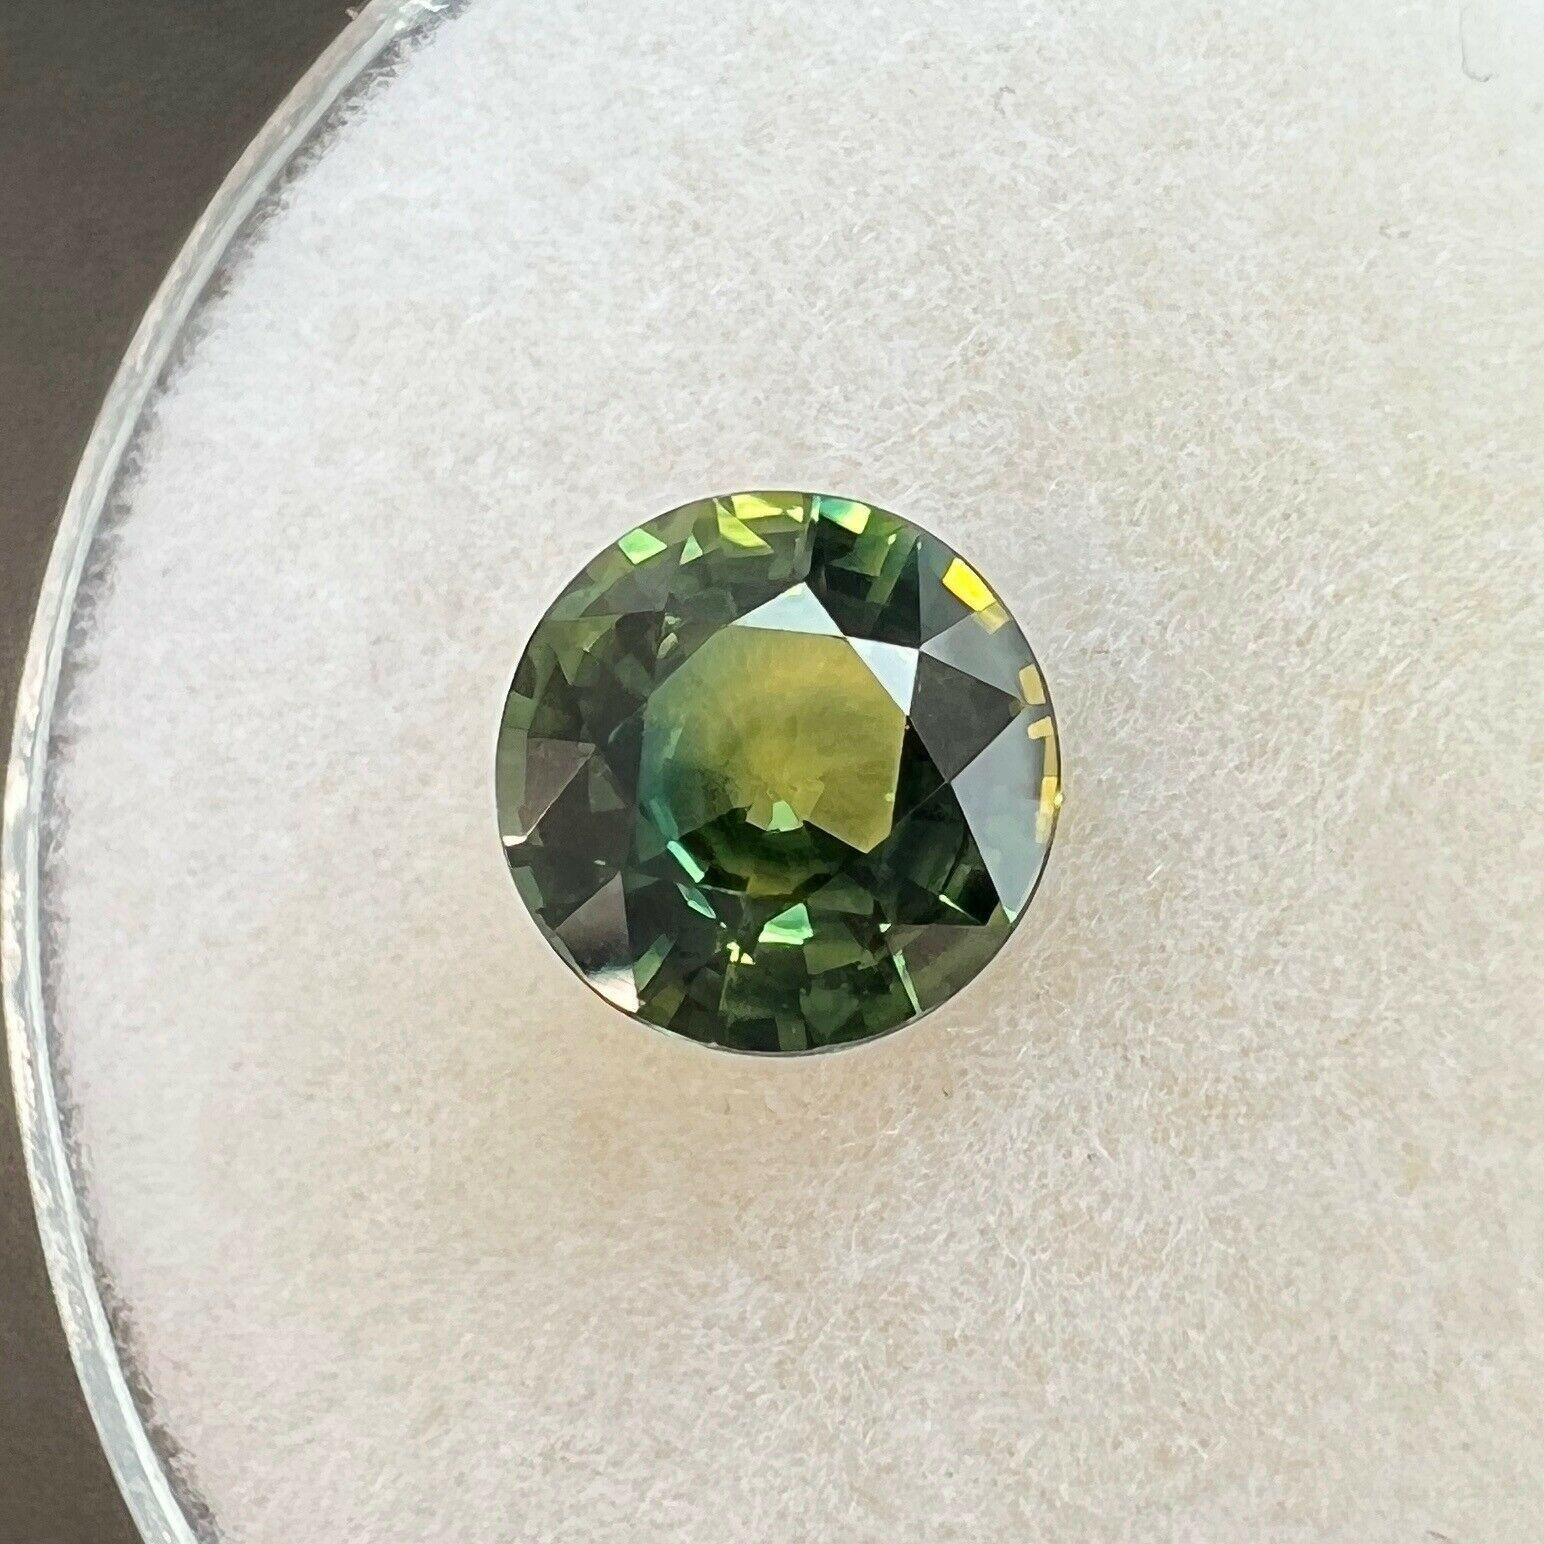 Unique Parti Bi Colour Sapphire 1.17ct Blue Yellow Green Round Loose Gem 6.2mm

Natural Greenish Yellow Blue Parti-Colour/Bi colour Sapphire Gemstone.
1.17 Carat with a beautiful blue green colour and excellent clarity, a very clean stone. Also has